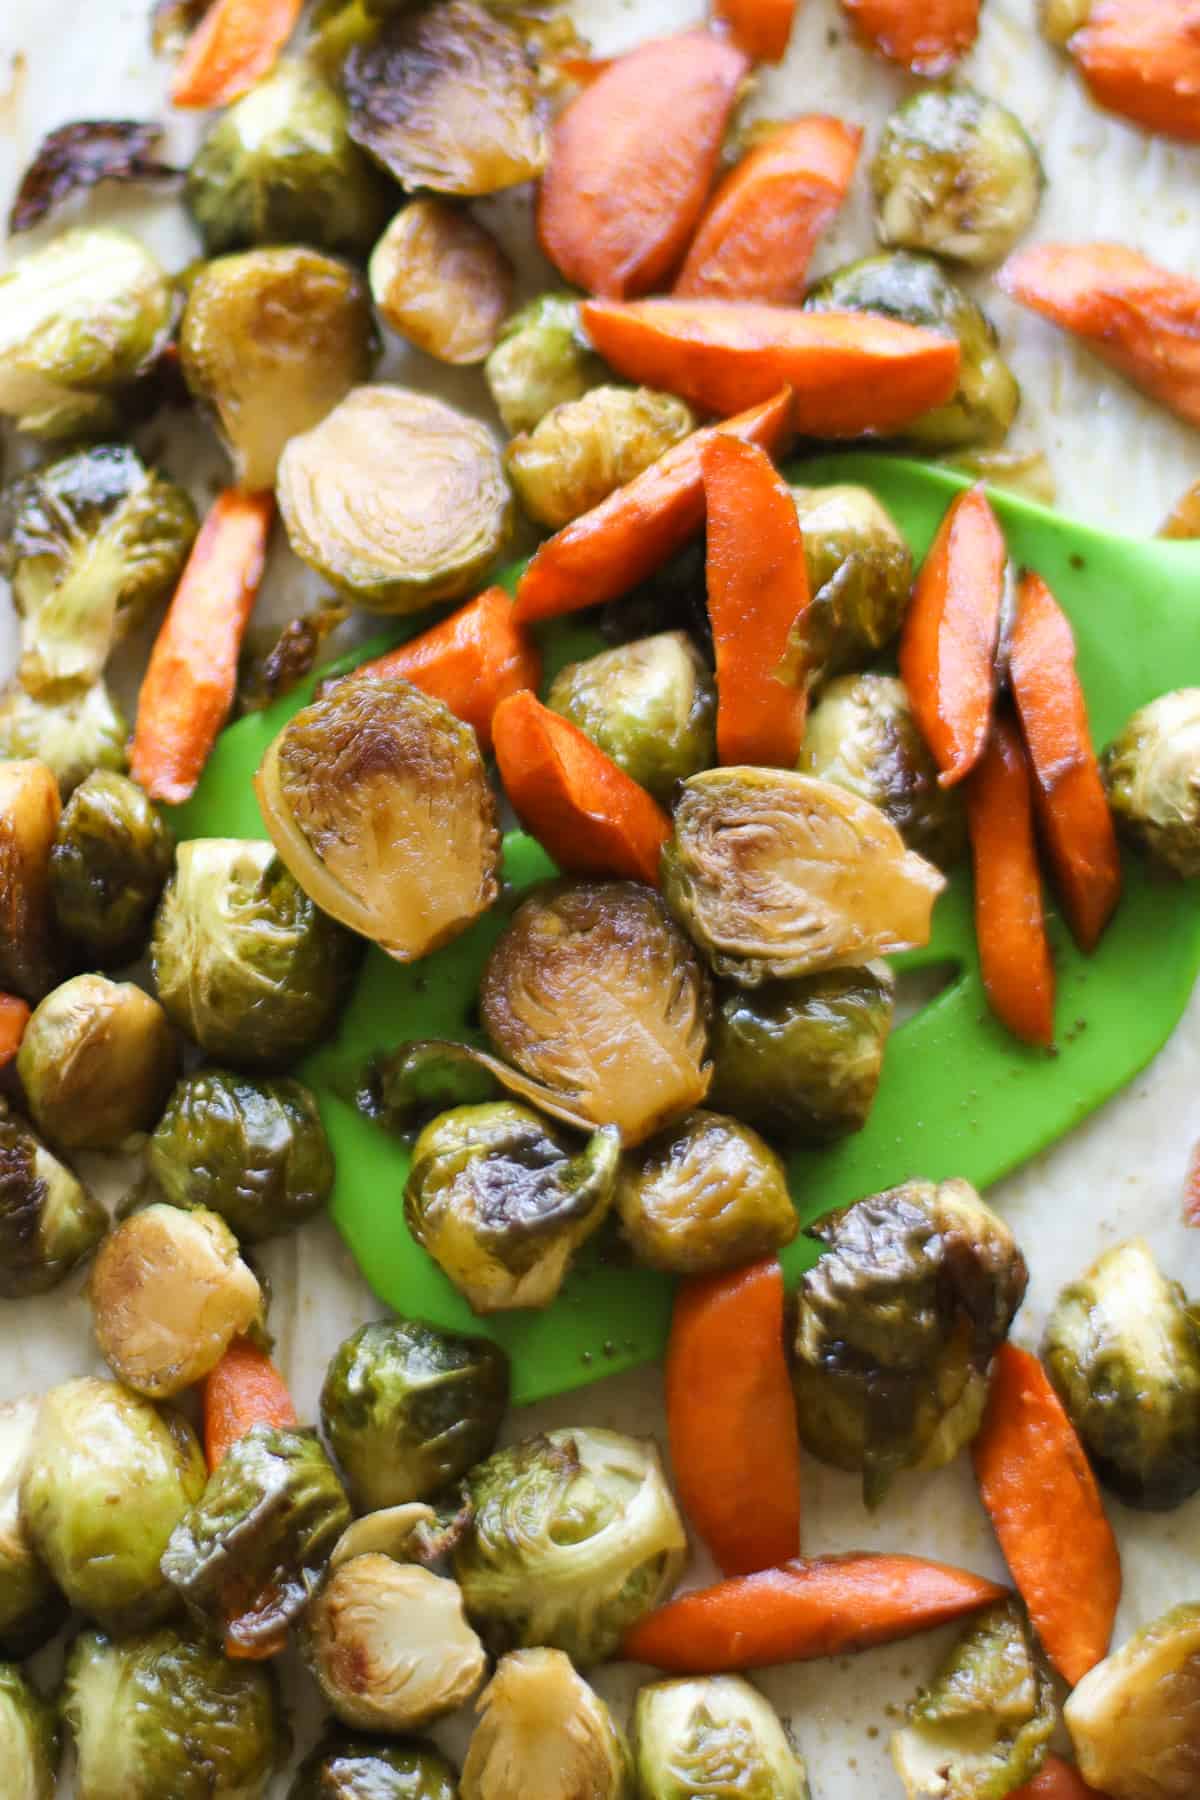 A close up shot of roasted brussels sprouts and carrots.